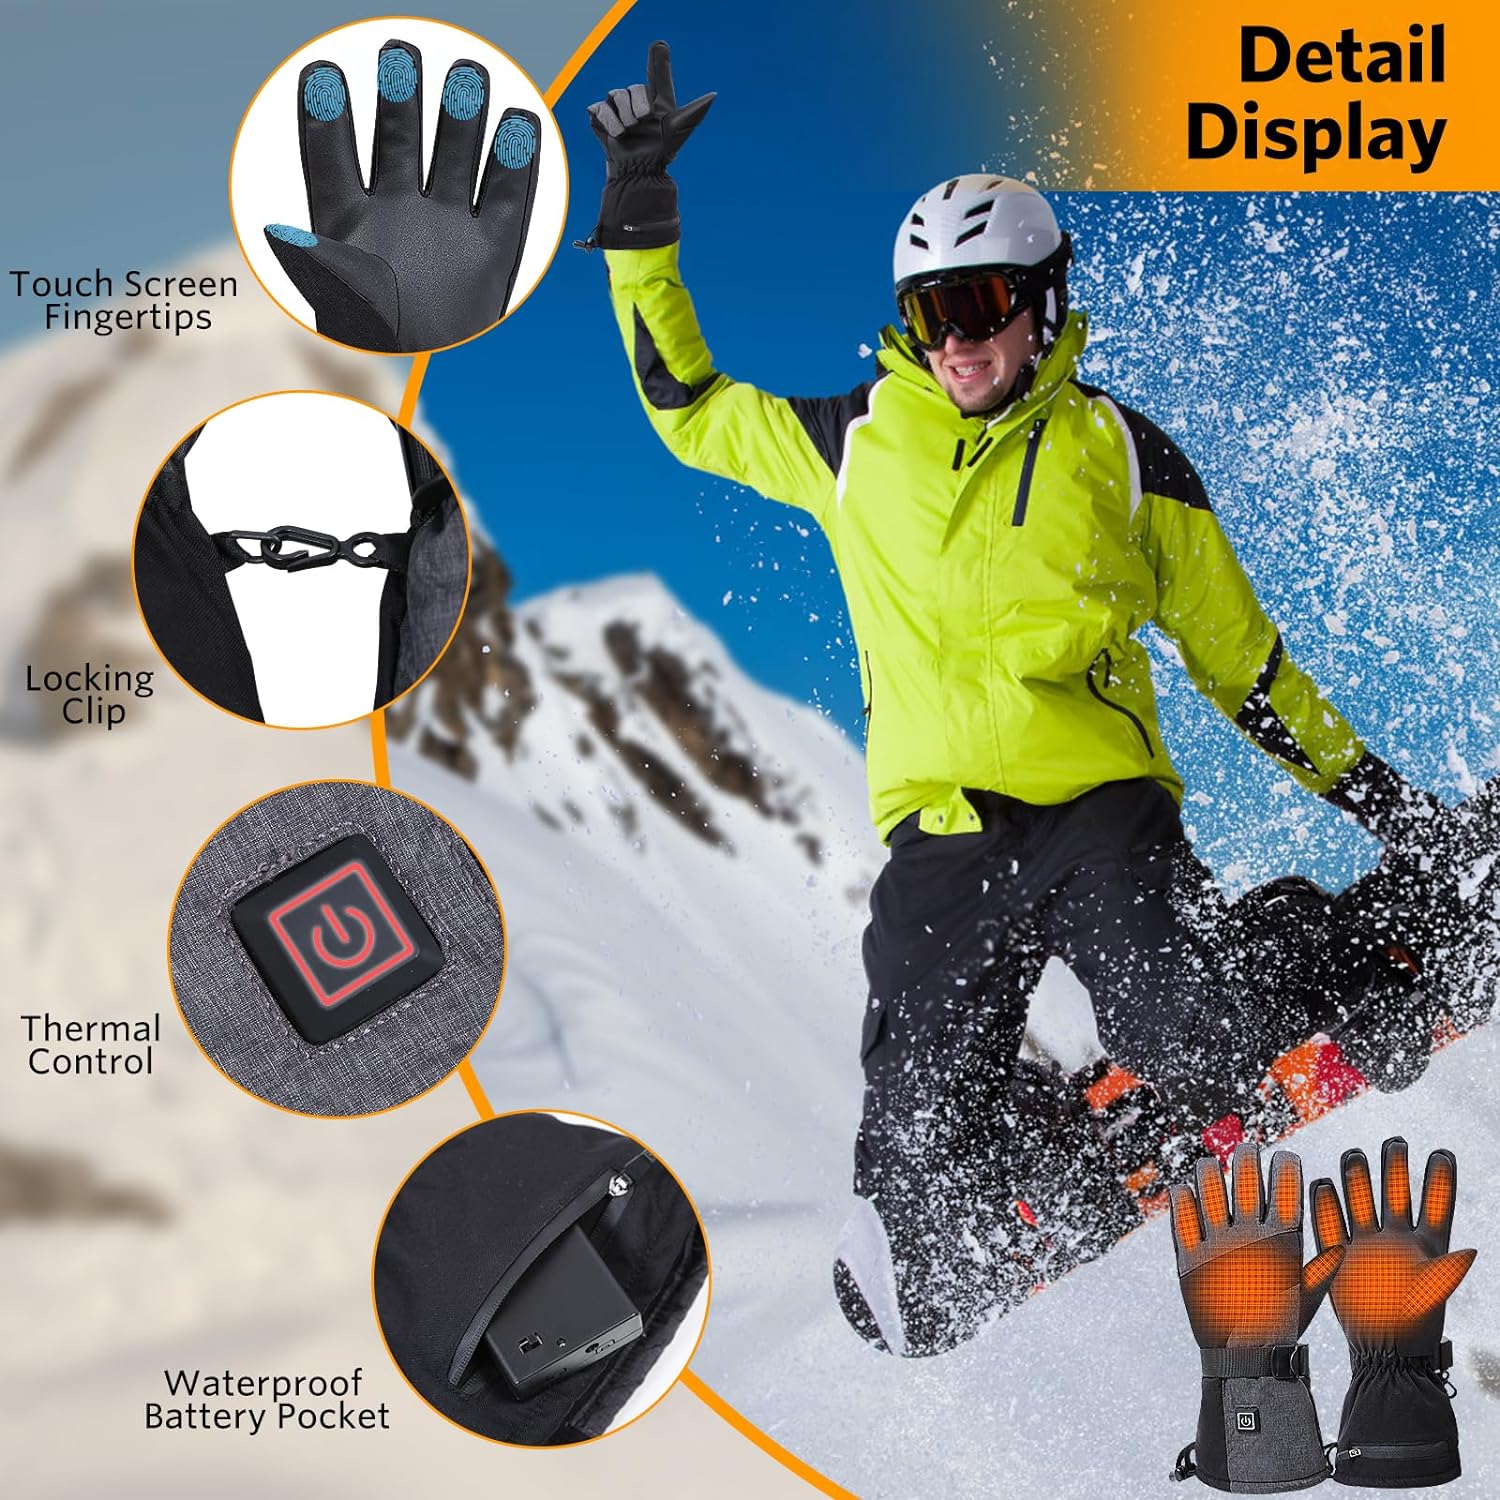 Heated Gloves for Men Women, Battery Powered Heated Gloves, Waterproof Touchscreen Winter Electric Hand Warmer Gloves for Cycling Skiing (Battery Not Included)